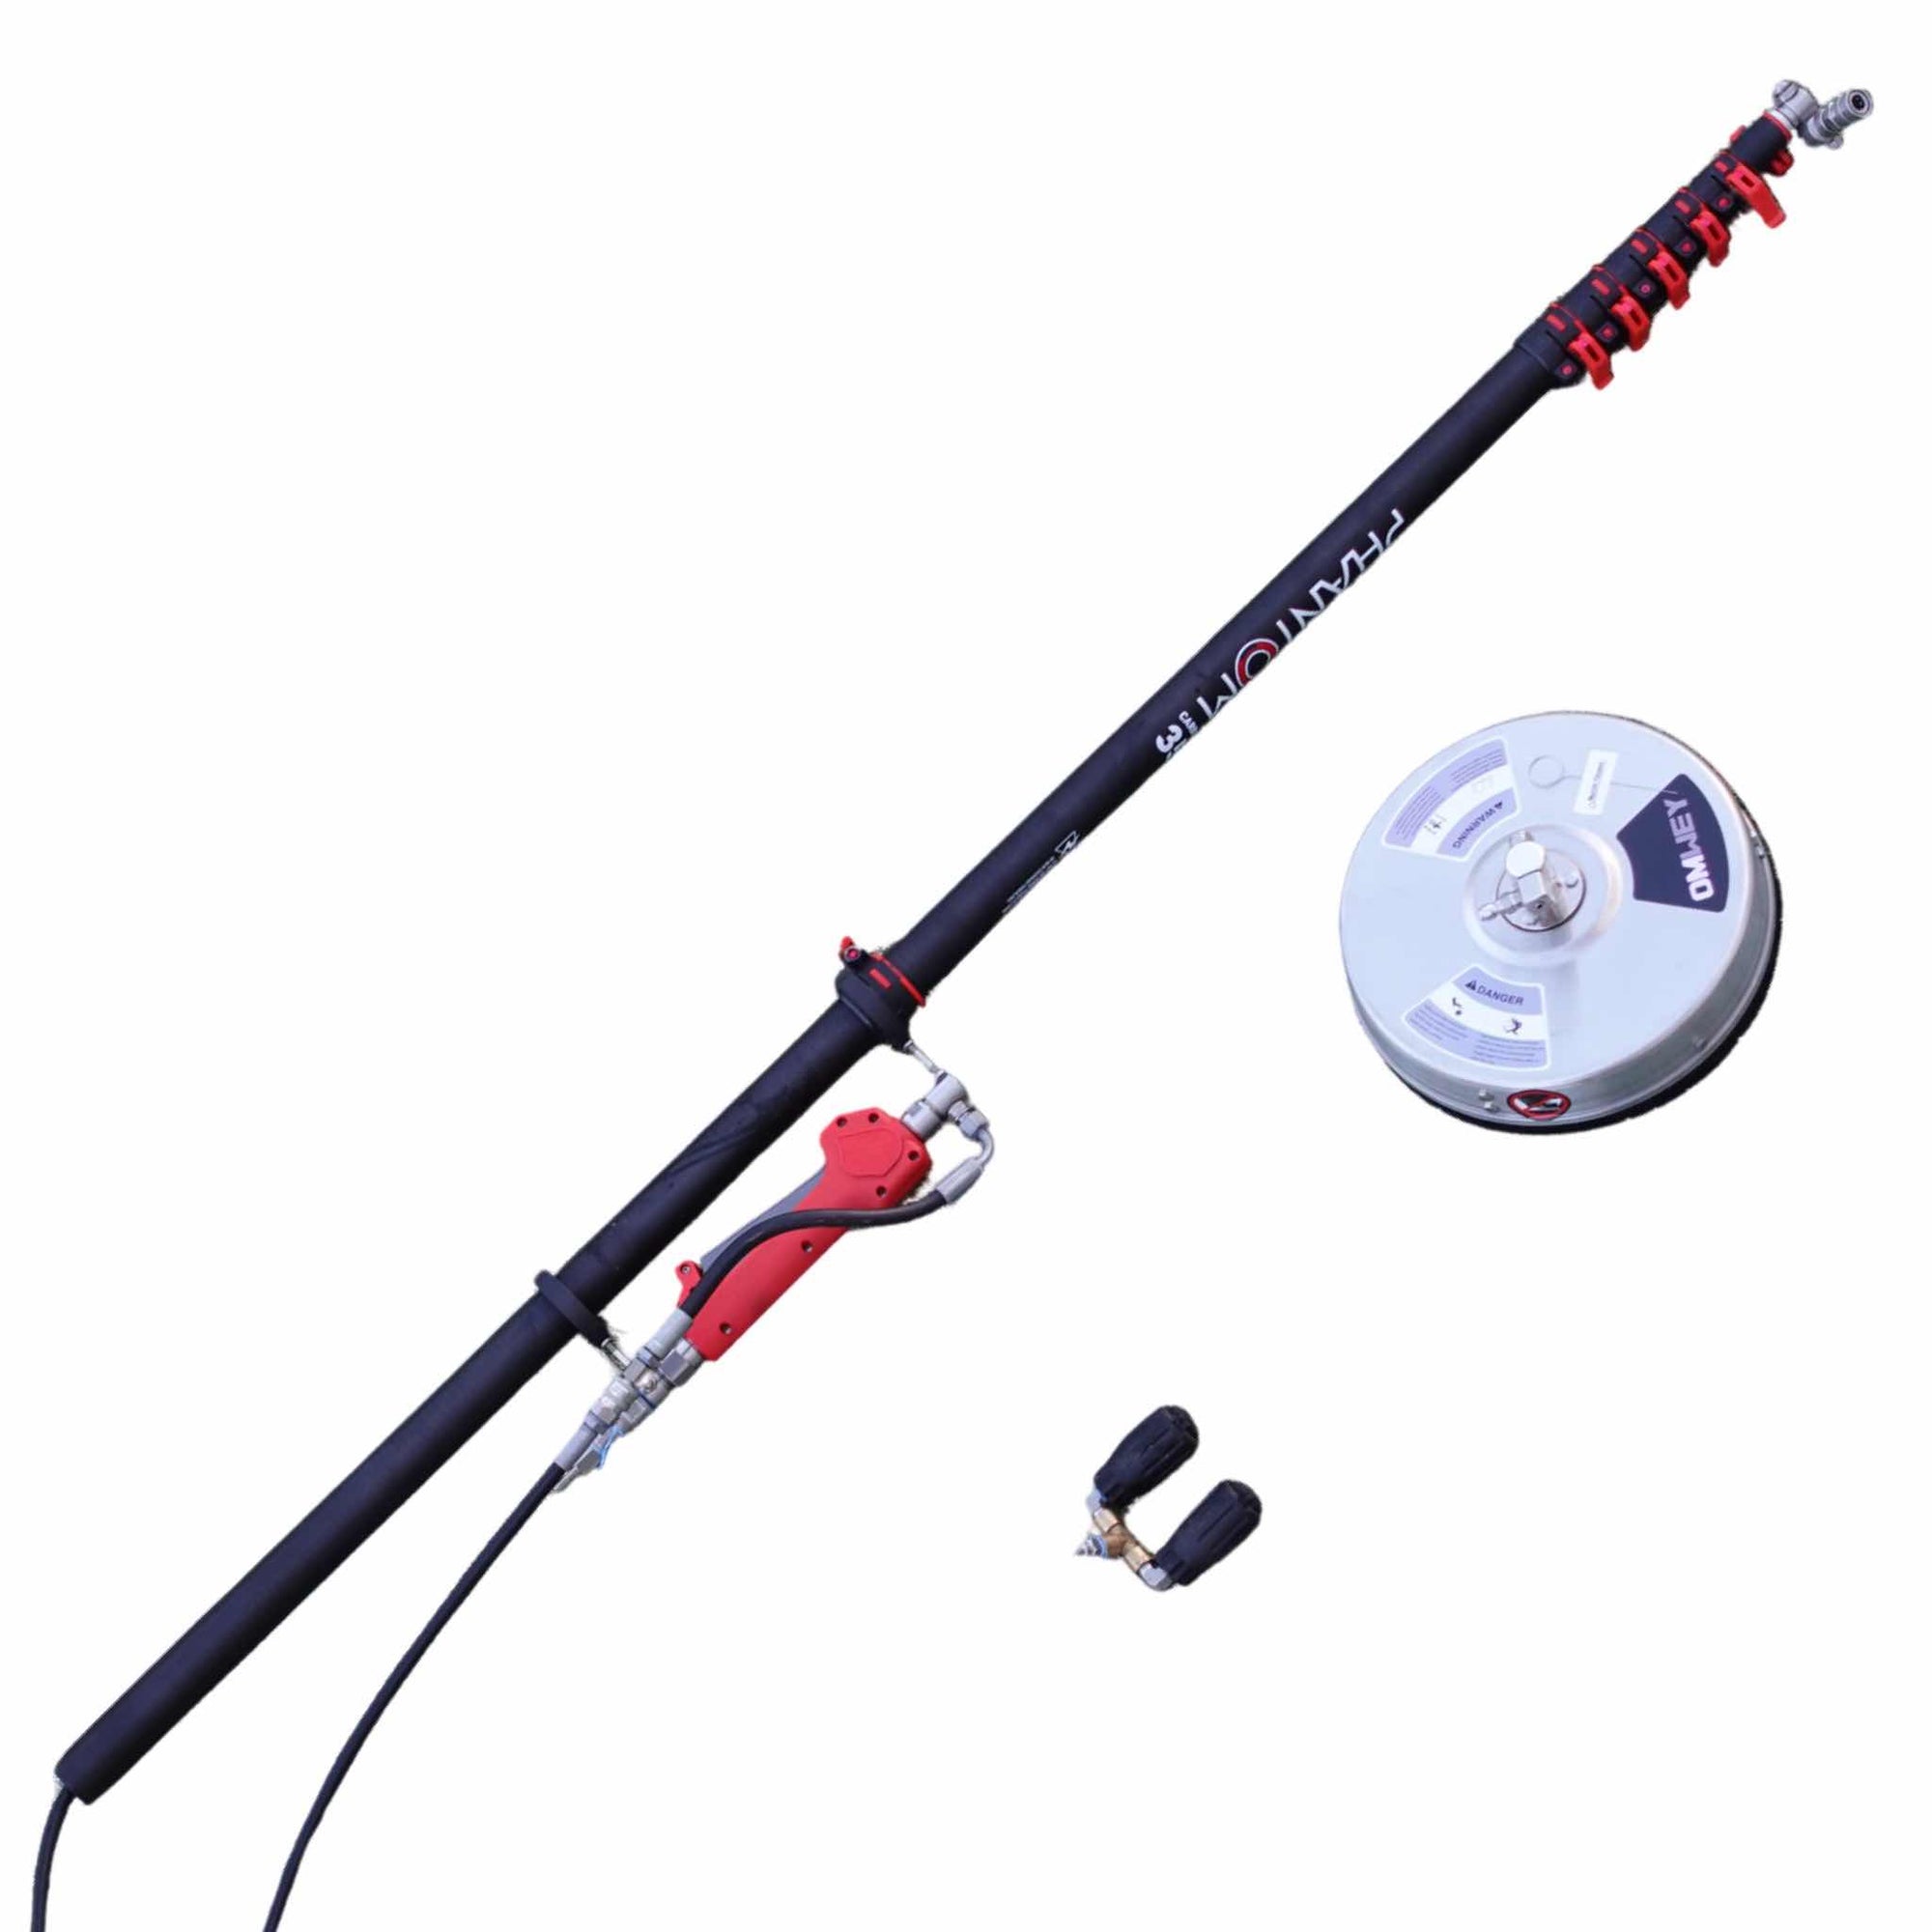 POWER POLE BUNDLE: 35 foot carbon pole, HP 4000 trigger, flat surface cleaner and twin turbos